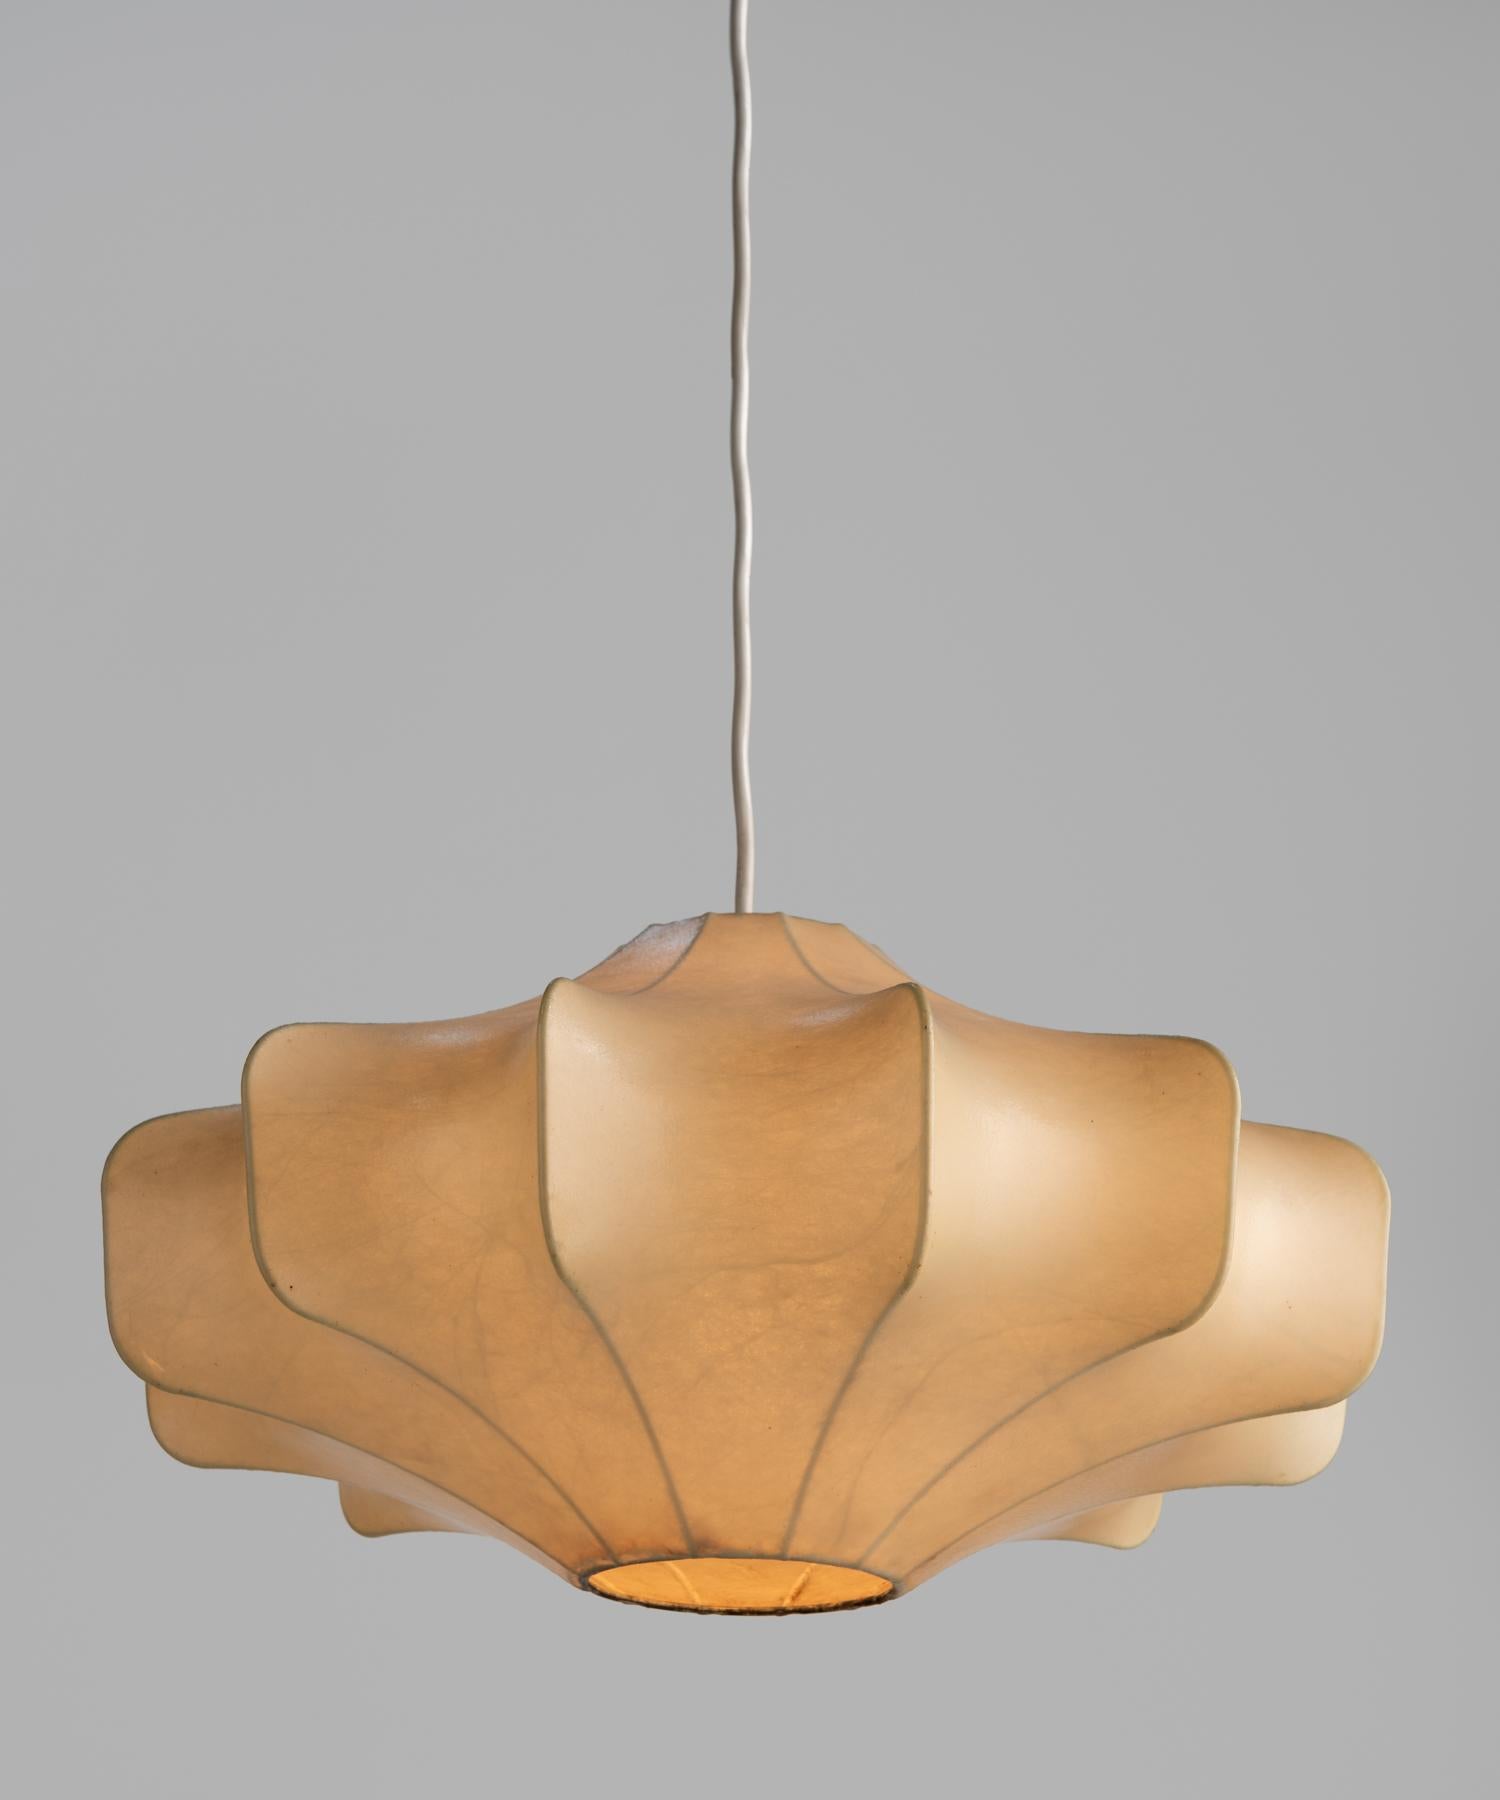 Cocoon pendant by Flos, circa 1960

Designed by Achille Castiglioni and Pier Giacomo Castiglione, with internal steel structure and transparent resin cocoon.